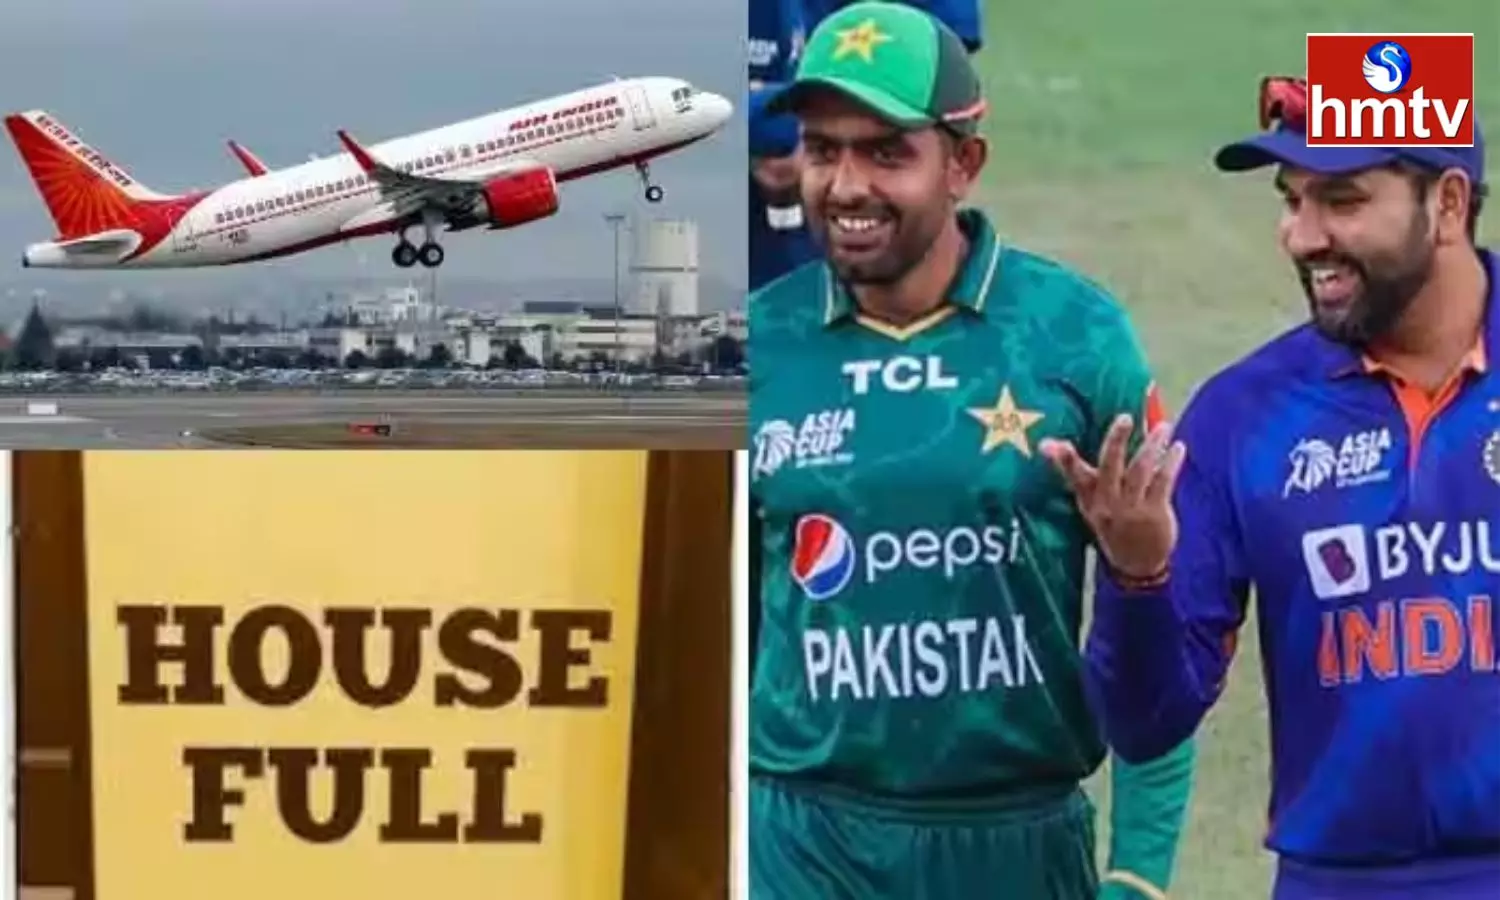 During the India-Pakistan Match in World Cup 2023 Demand for Flight Tickets Increased Tremendously